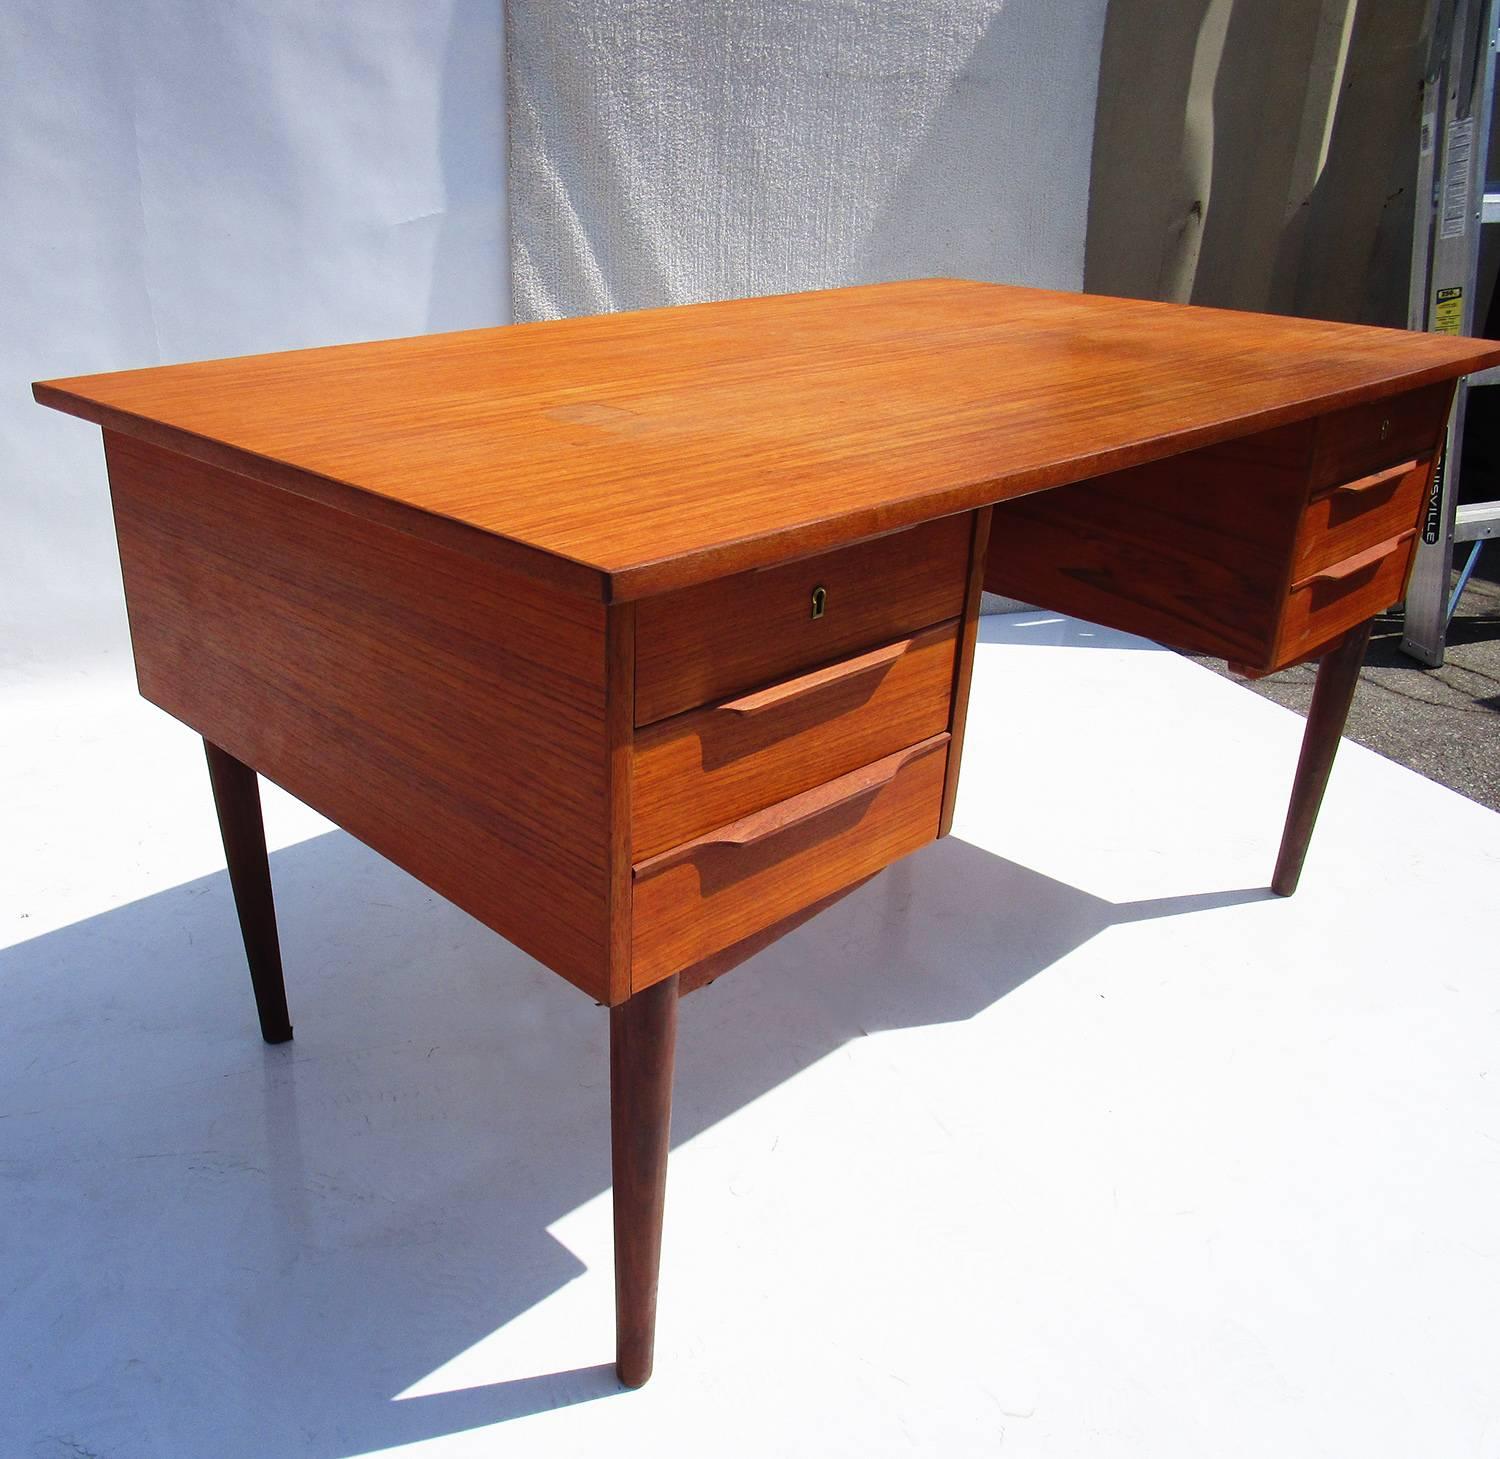 Classic Danish design with a unique bookcase front. The desk is in solid condition with original finish, showing spotting on top surface.